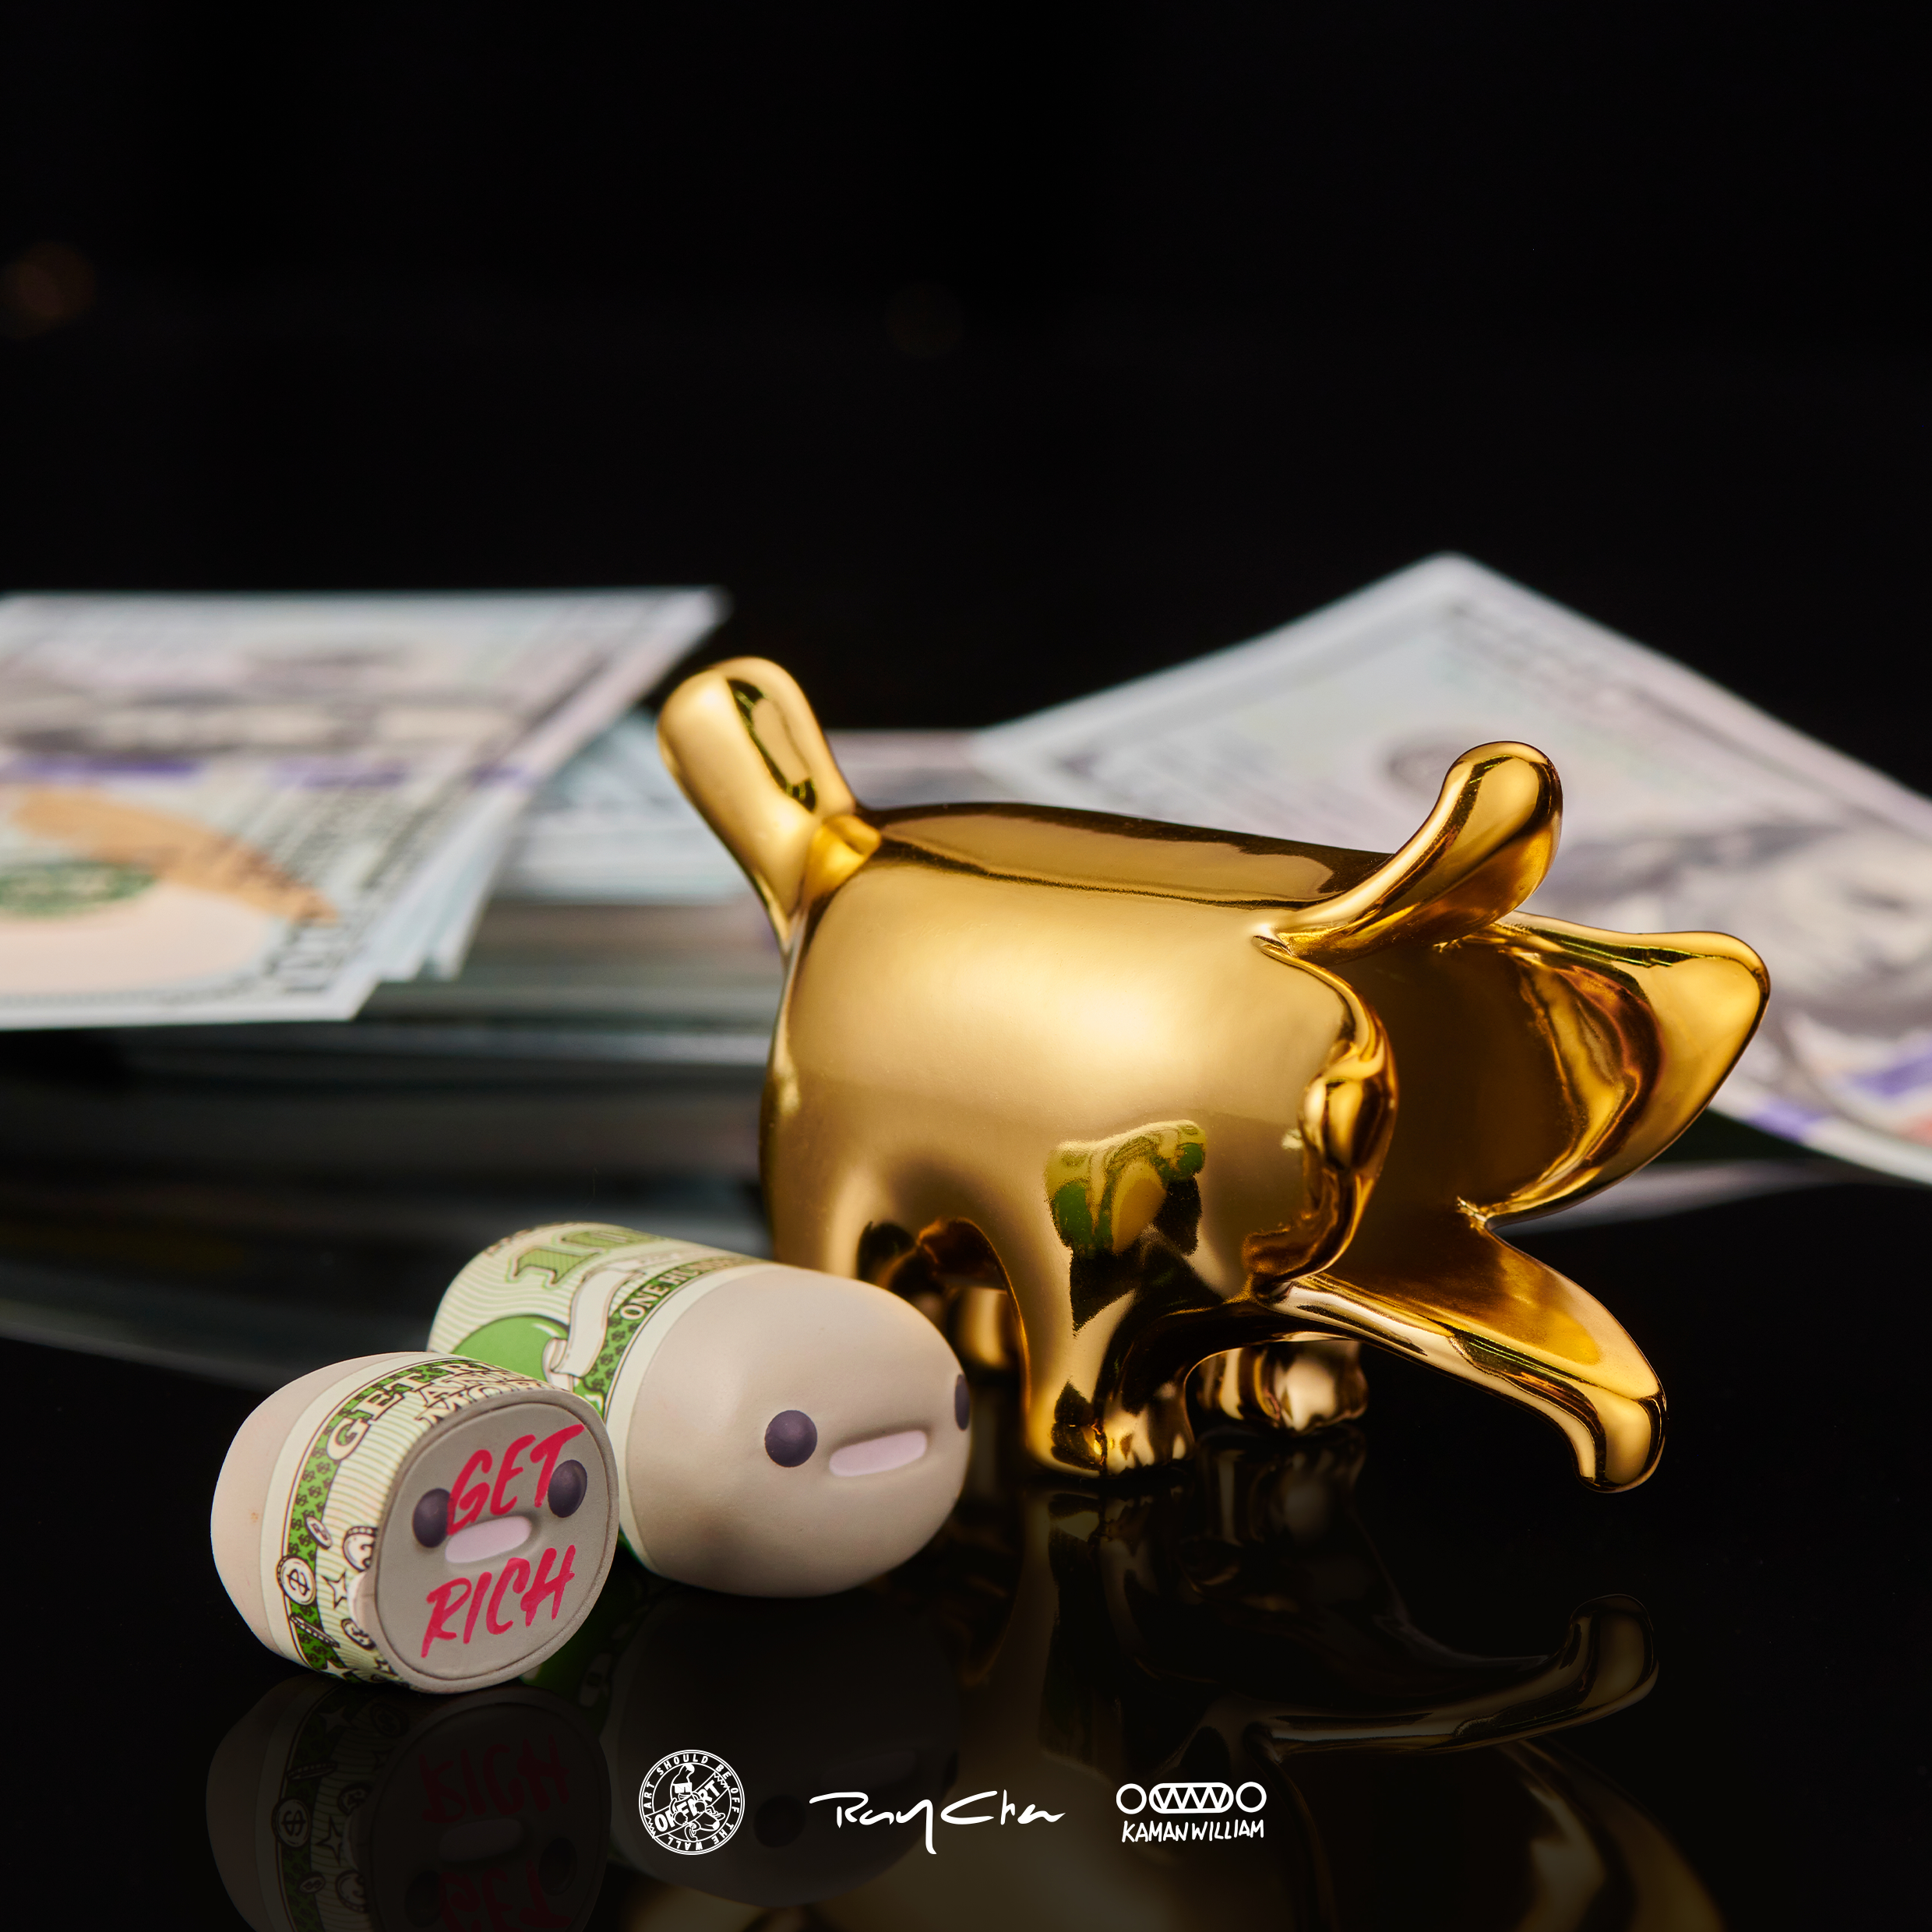 Alt text: OFFART X Kamanwillam Bananaer Dog Mini Gold Edition, a PVC toy featuring a gold dog figurine with money, a piggy bank, and paper rolls. Magnetically detachable with a small banana pulp.